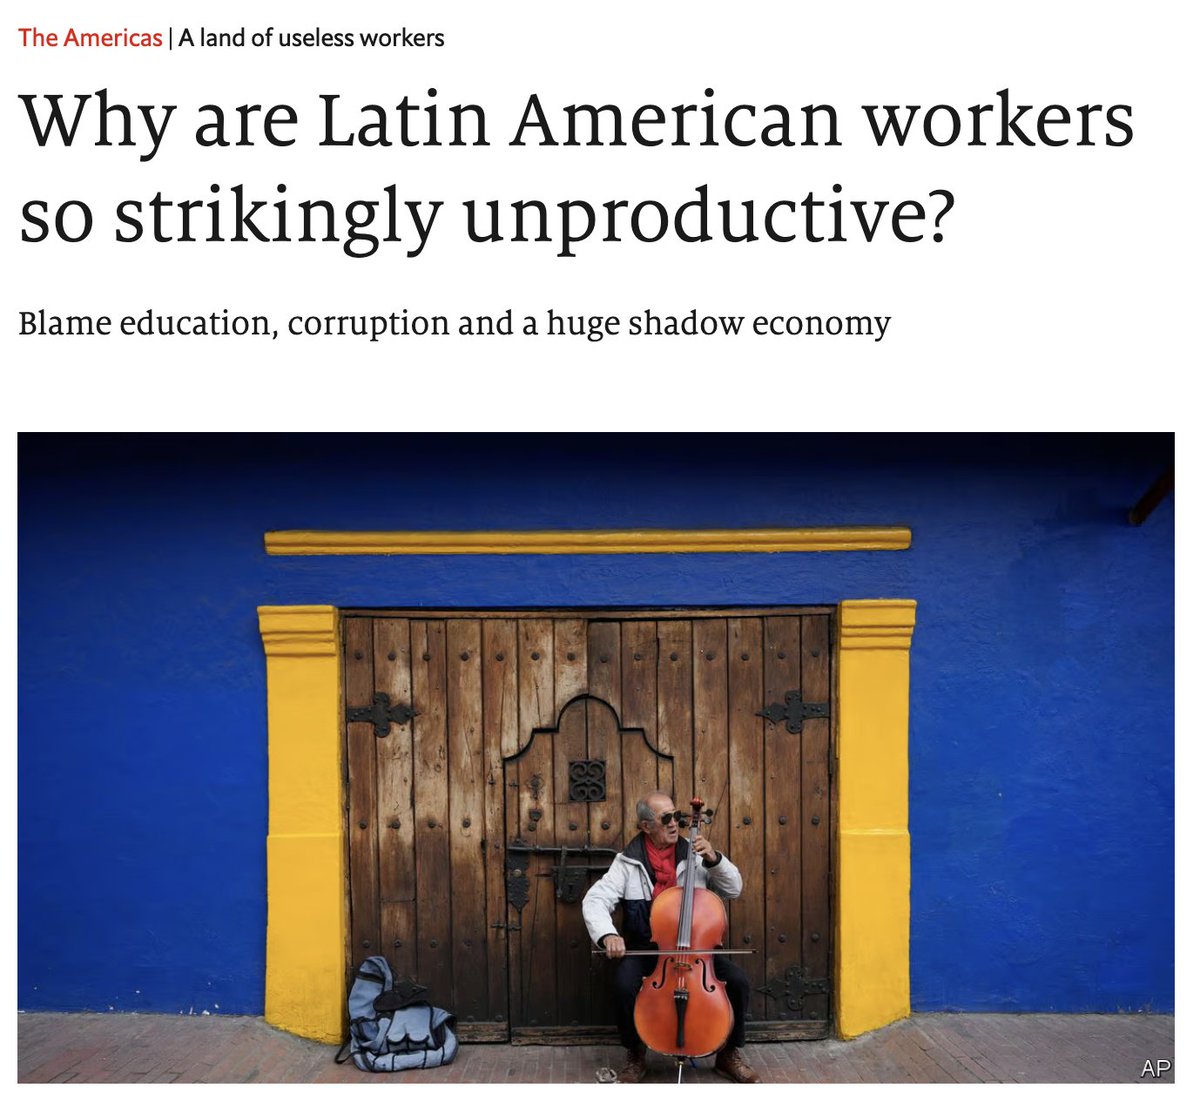 Latin America, especially Mexico, has some of the most hard working people on the planet - and they are very productive. The reason the West is richer has a lot to do with structural issues - like major corporations sucking up money. 'A land of useless workers' is insulting.